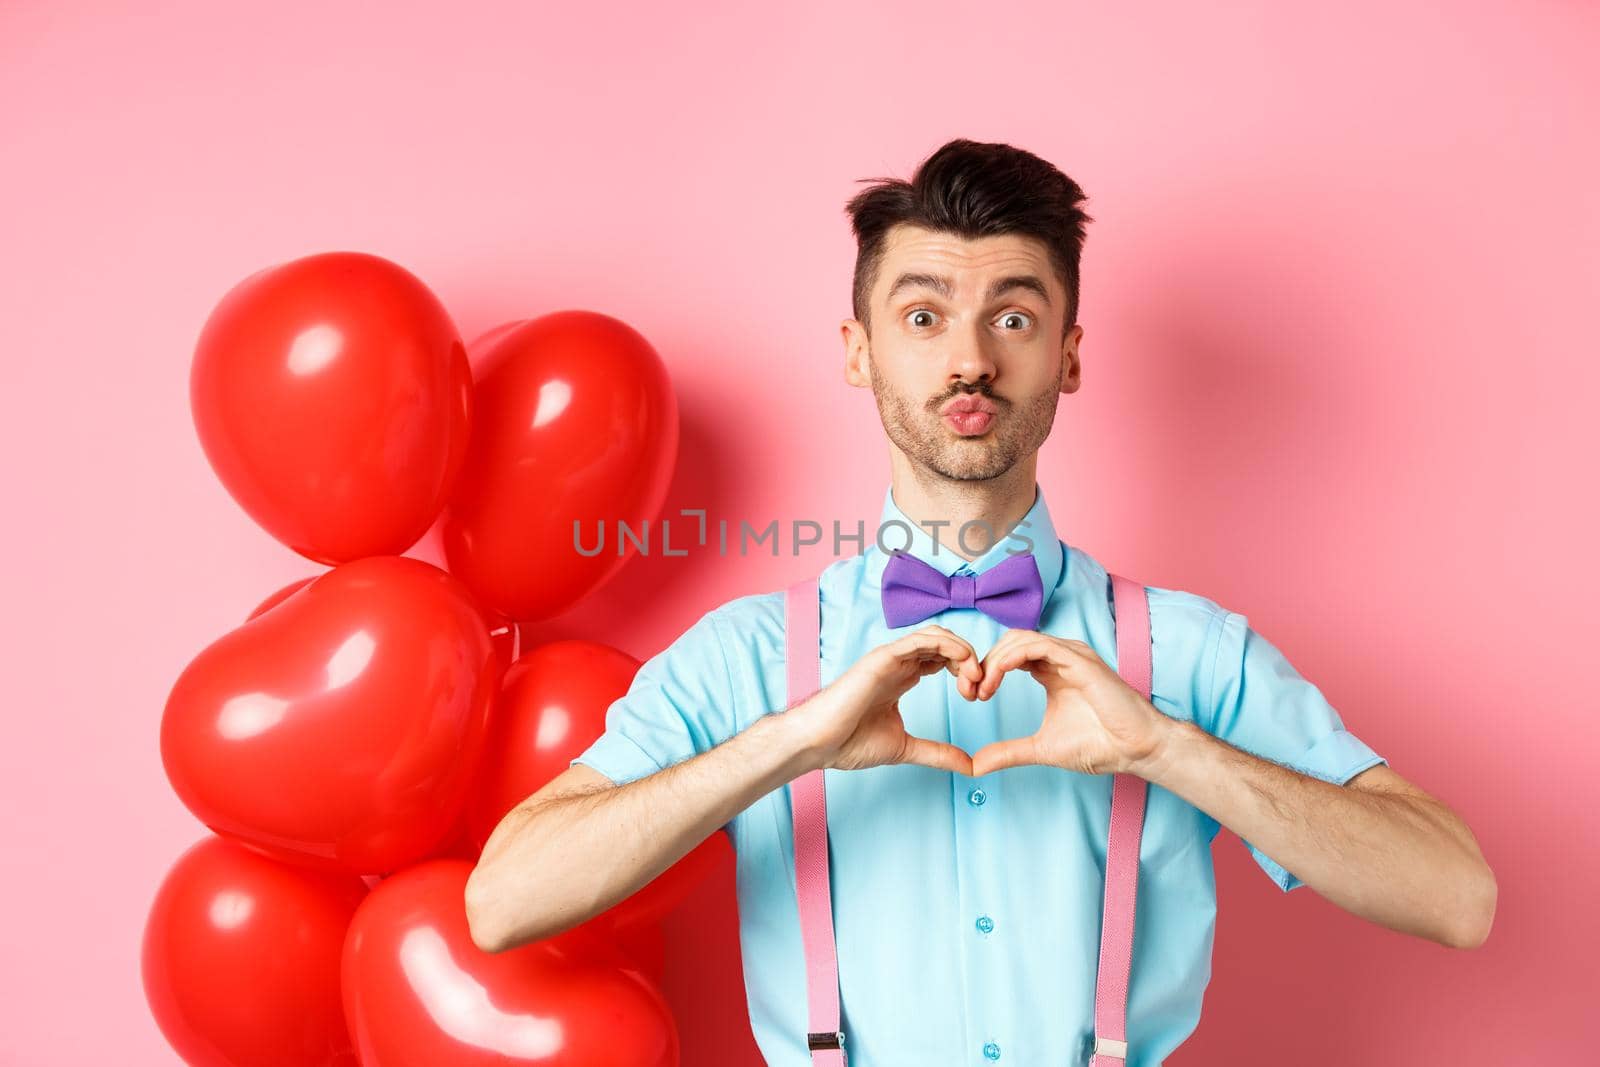 Valentines day concept. Cute boyfriend pucker lips for kiss, standing in bow-tie with heart gesture, say I love you, standing on pink background.